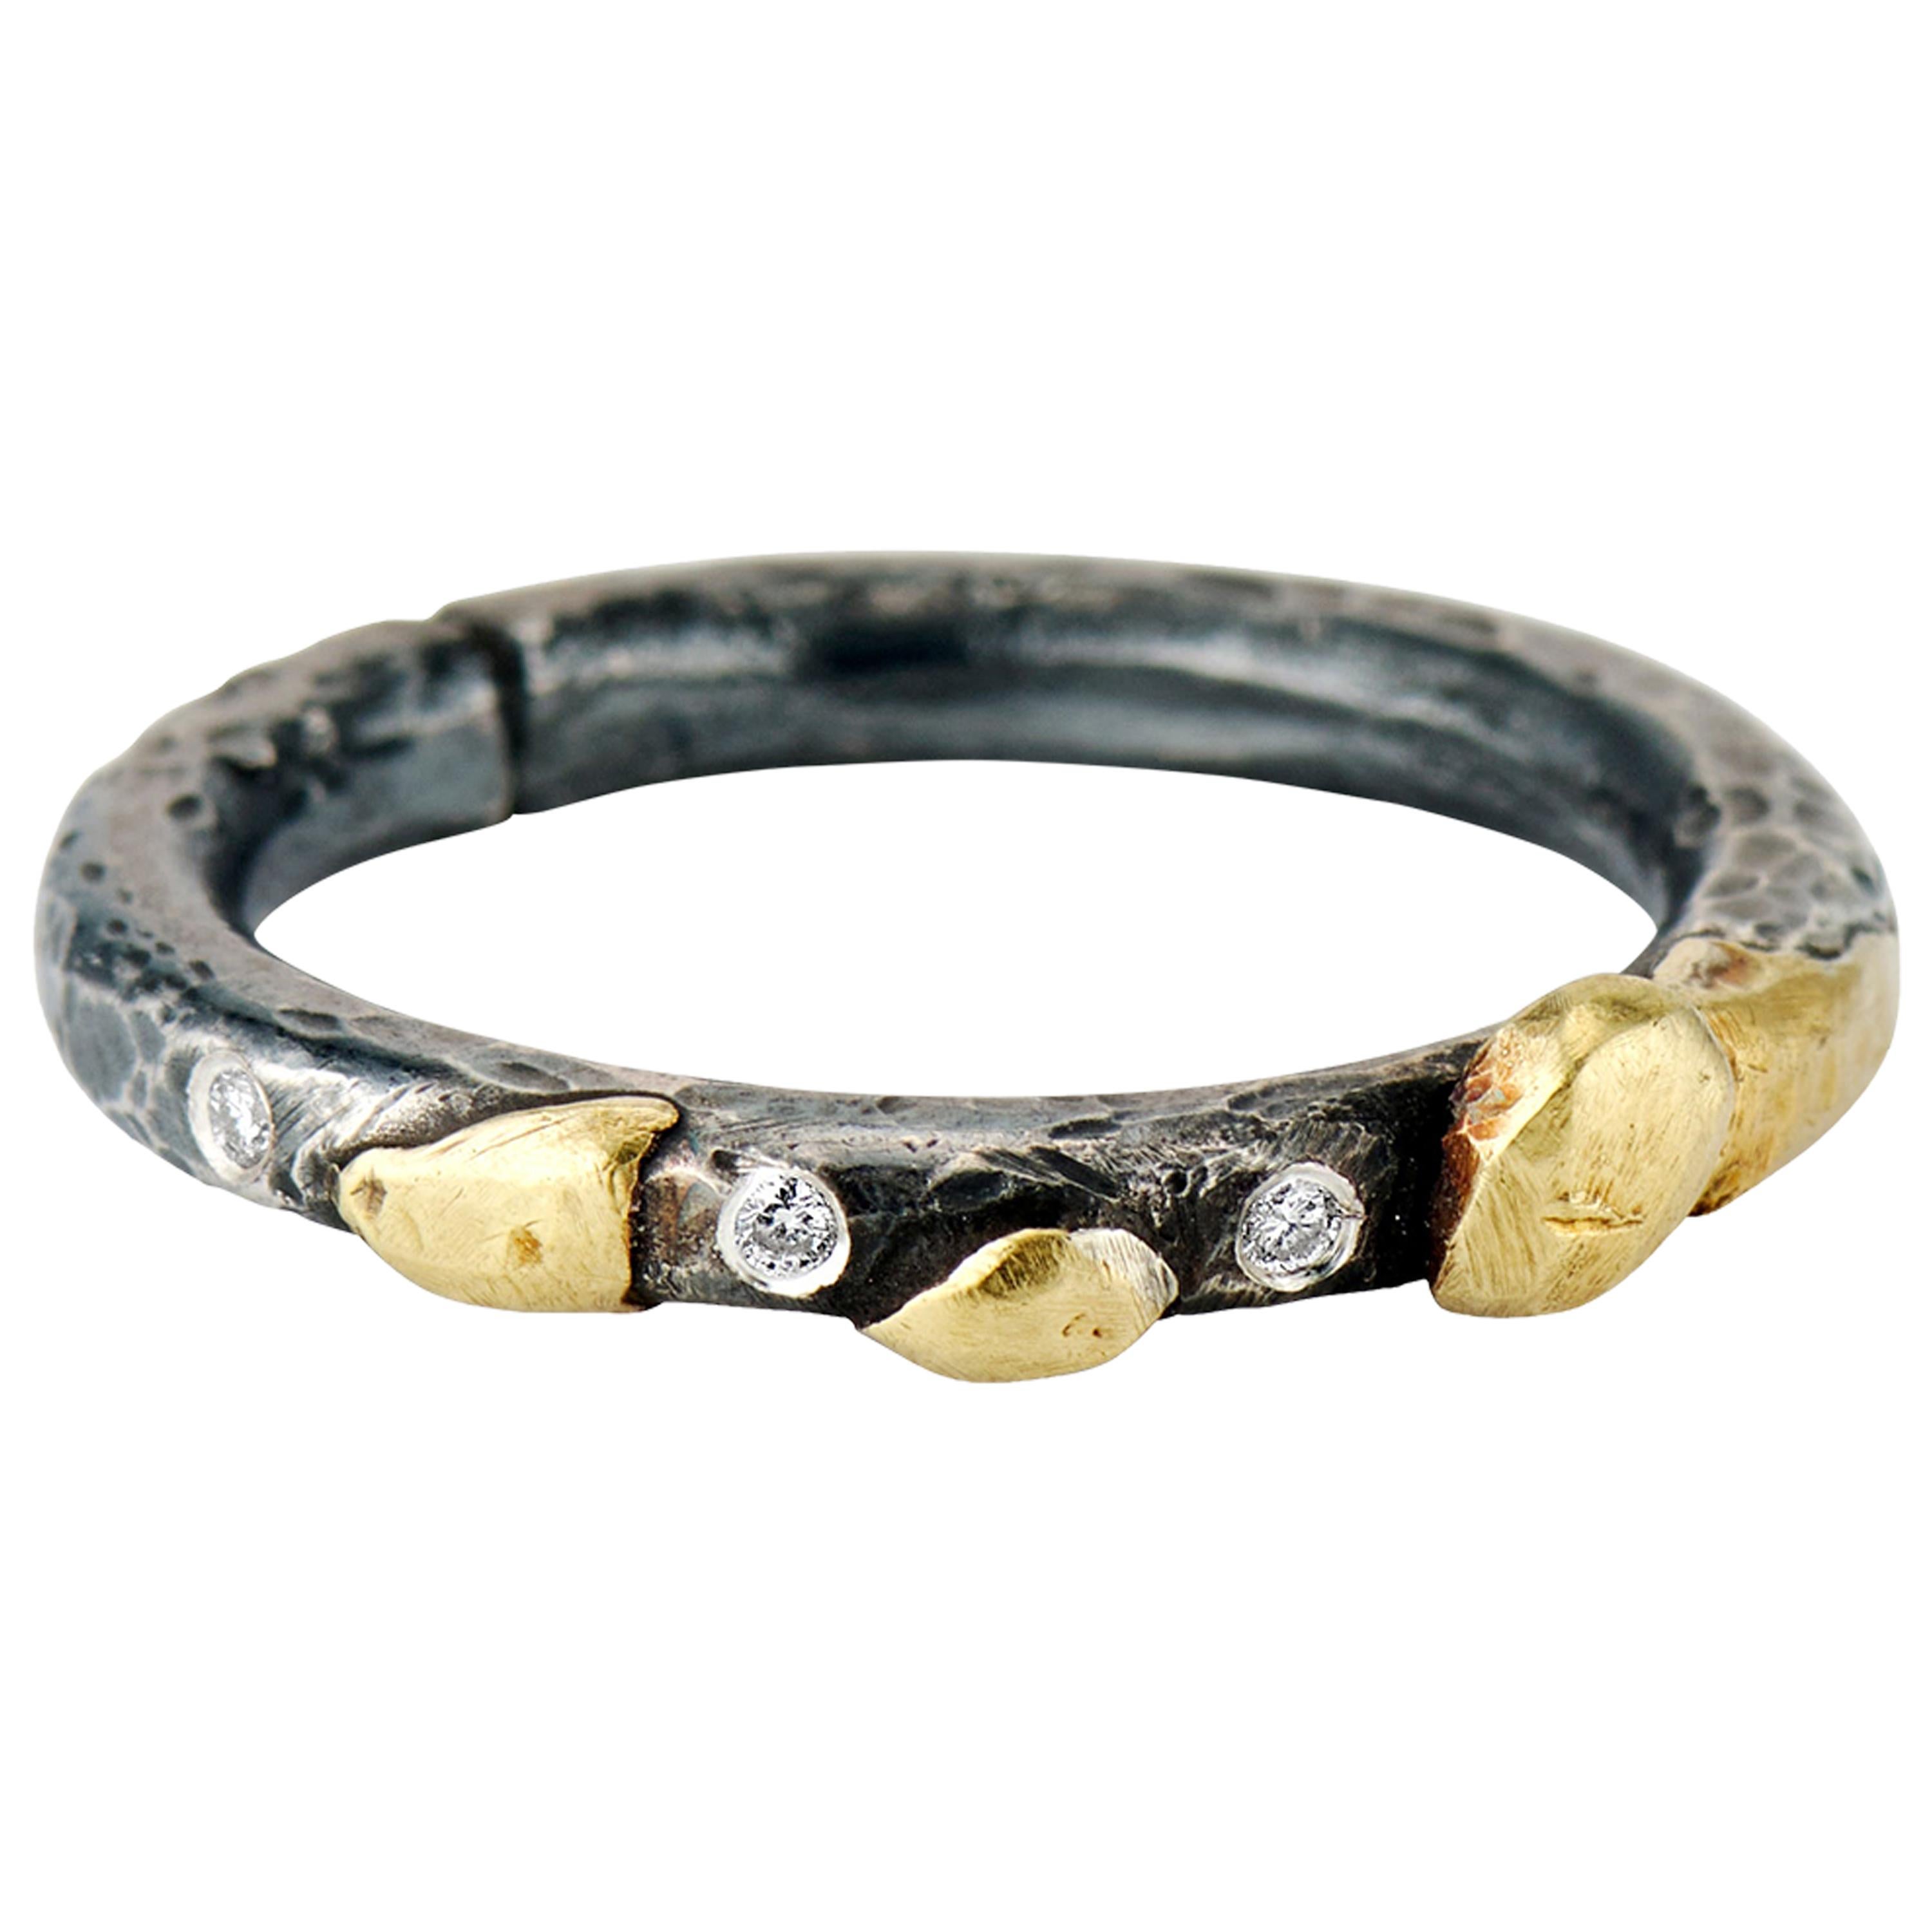 Diamond, Yellow Gold, Oxidized Sterling Silver, Mixed Metal Stacking Band Ring